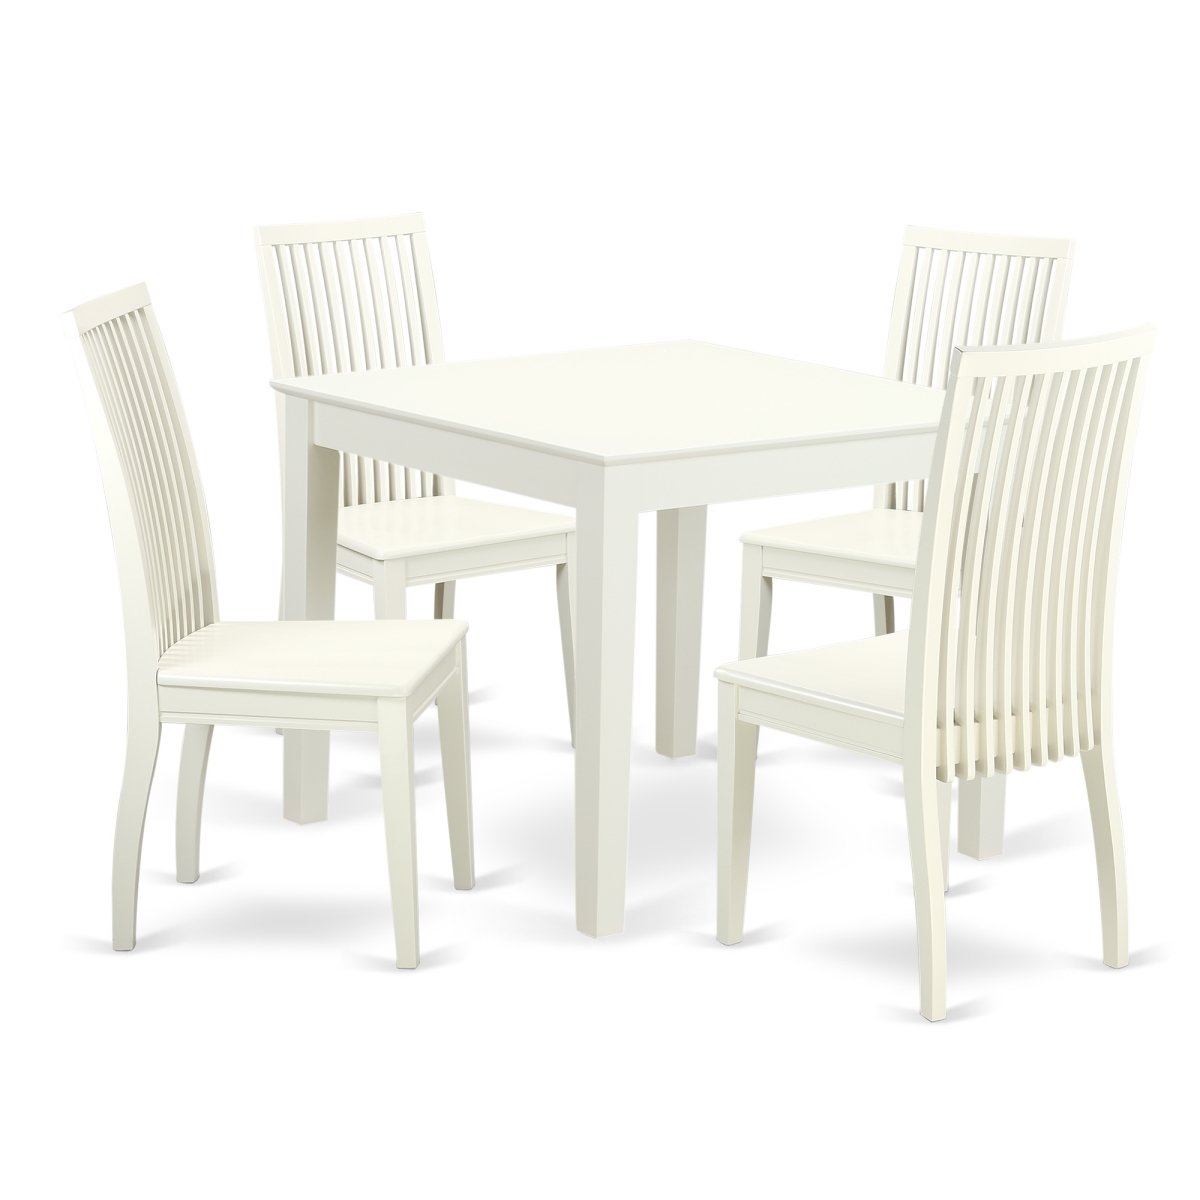 Oxip5-lwh-w 5 Piece Dinette Table Set, Linen White